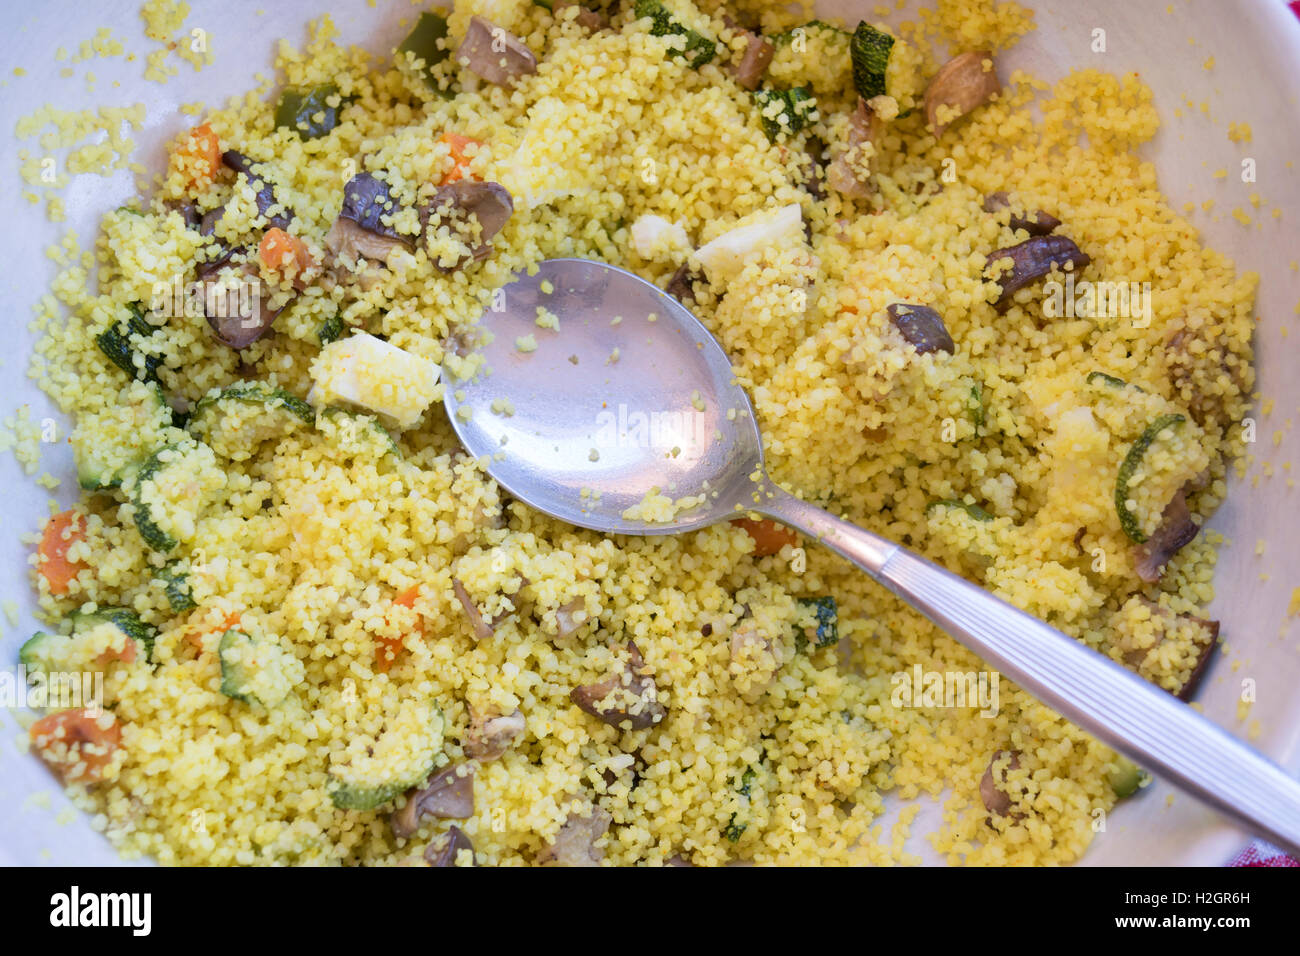 couscous salad with saffron and variety of vegetables Stock Photo